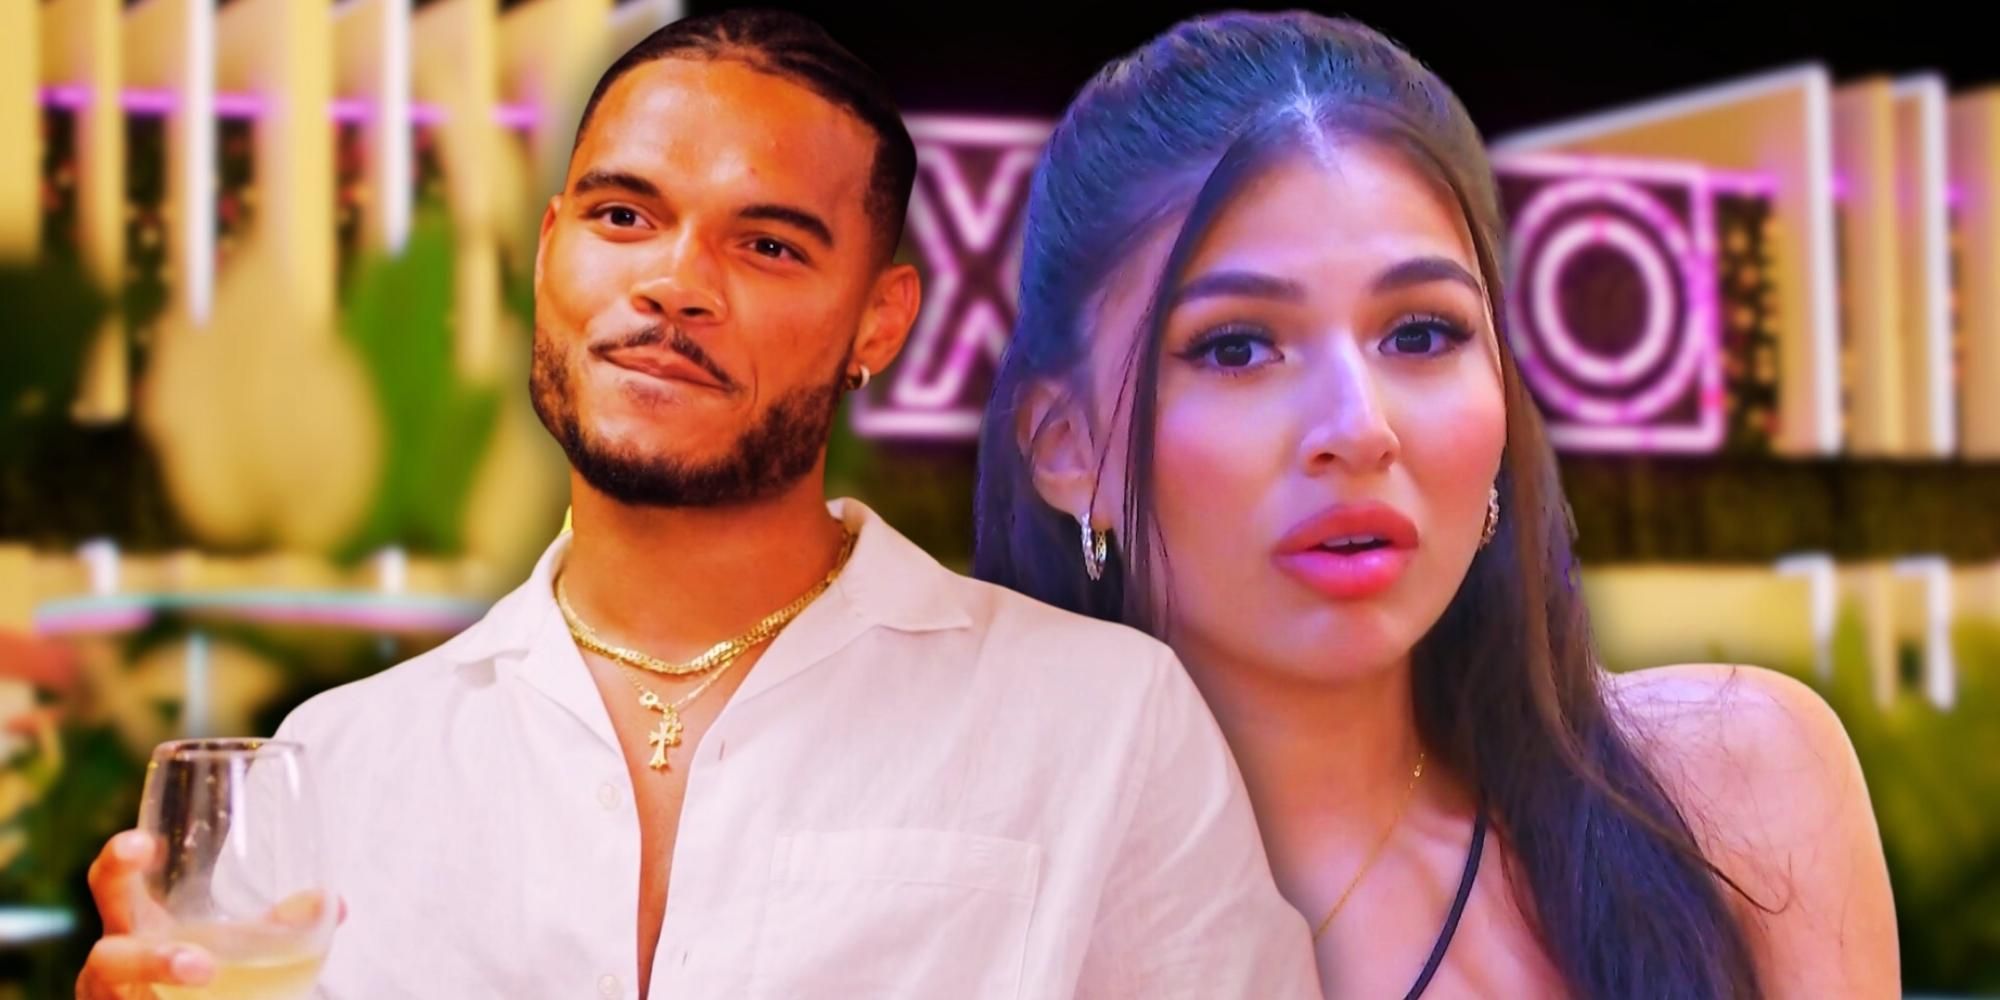 What Exactly Is Going On With Leo & Kassy At The Love Island USA Villa?